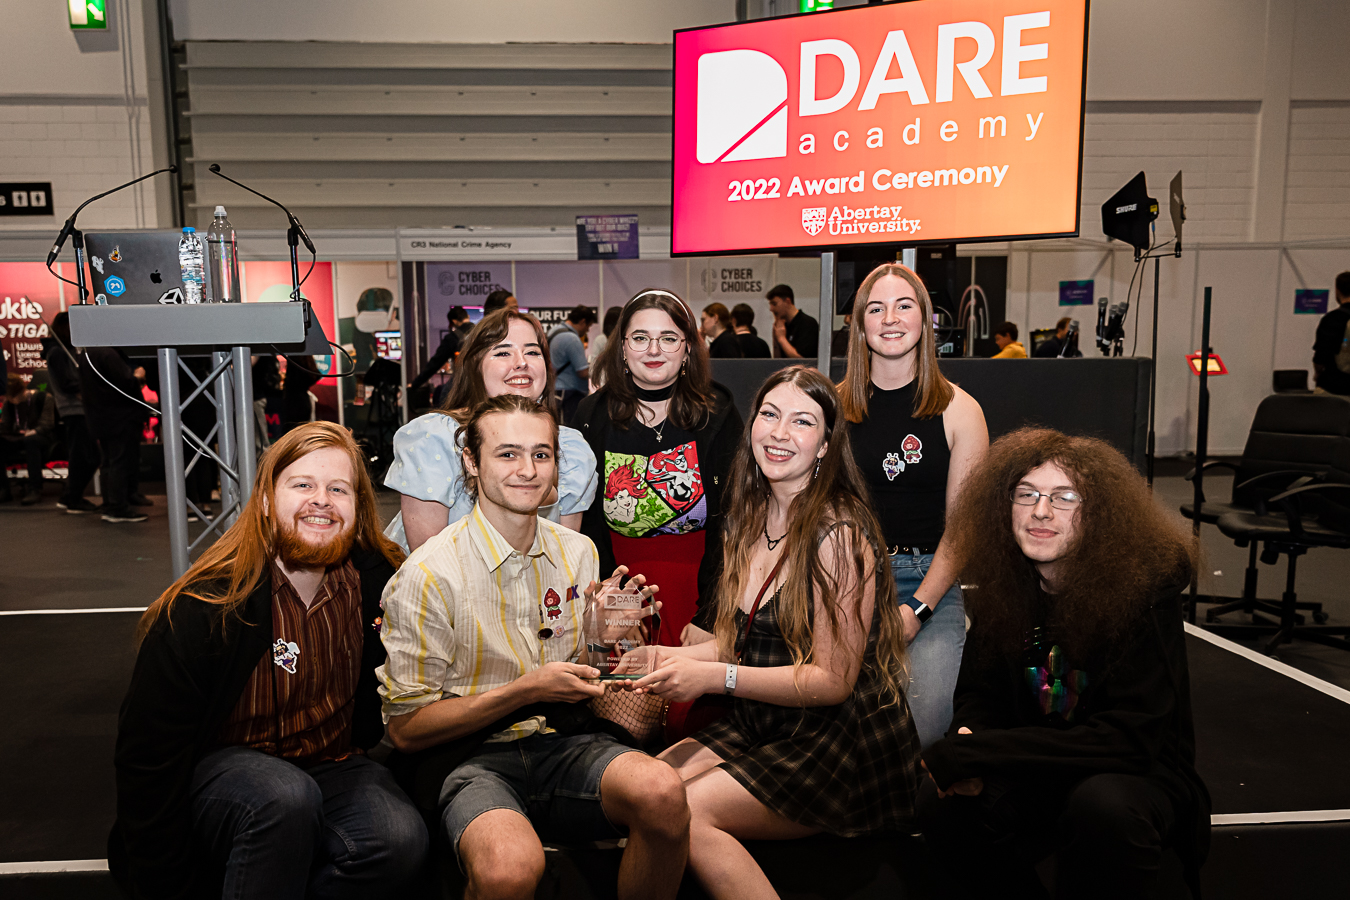 Yellow Crow Games announced as winner of Dare Academy 2022